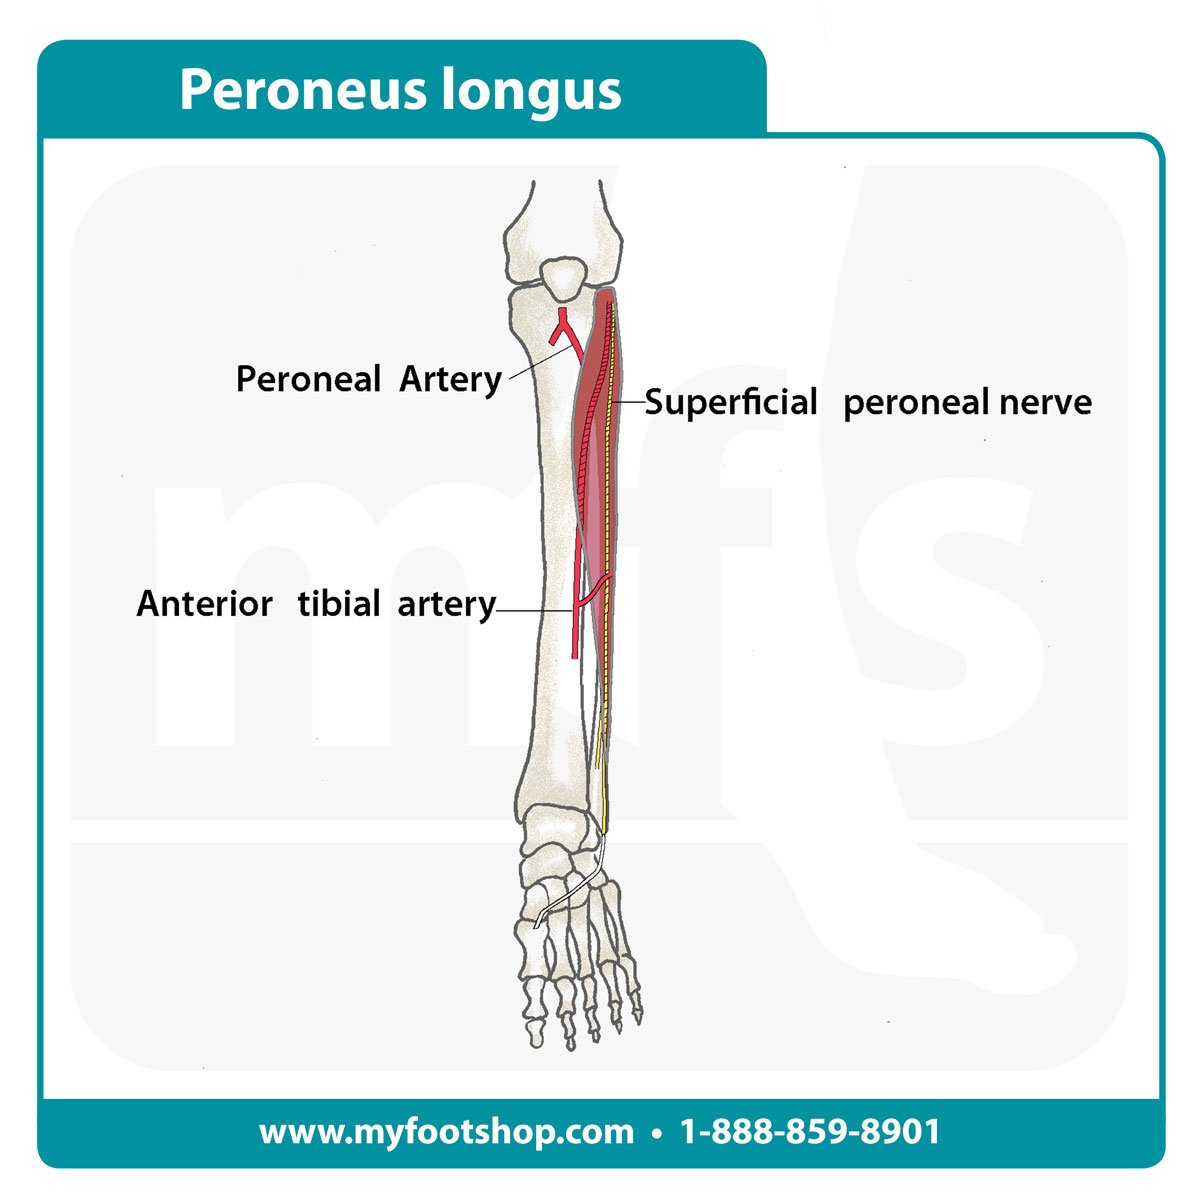 Image of the peroneus longus muscle and tendon